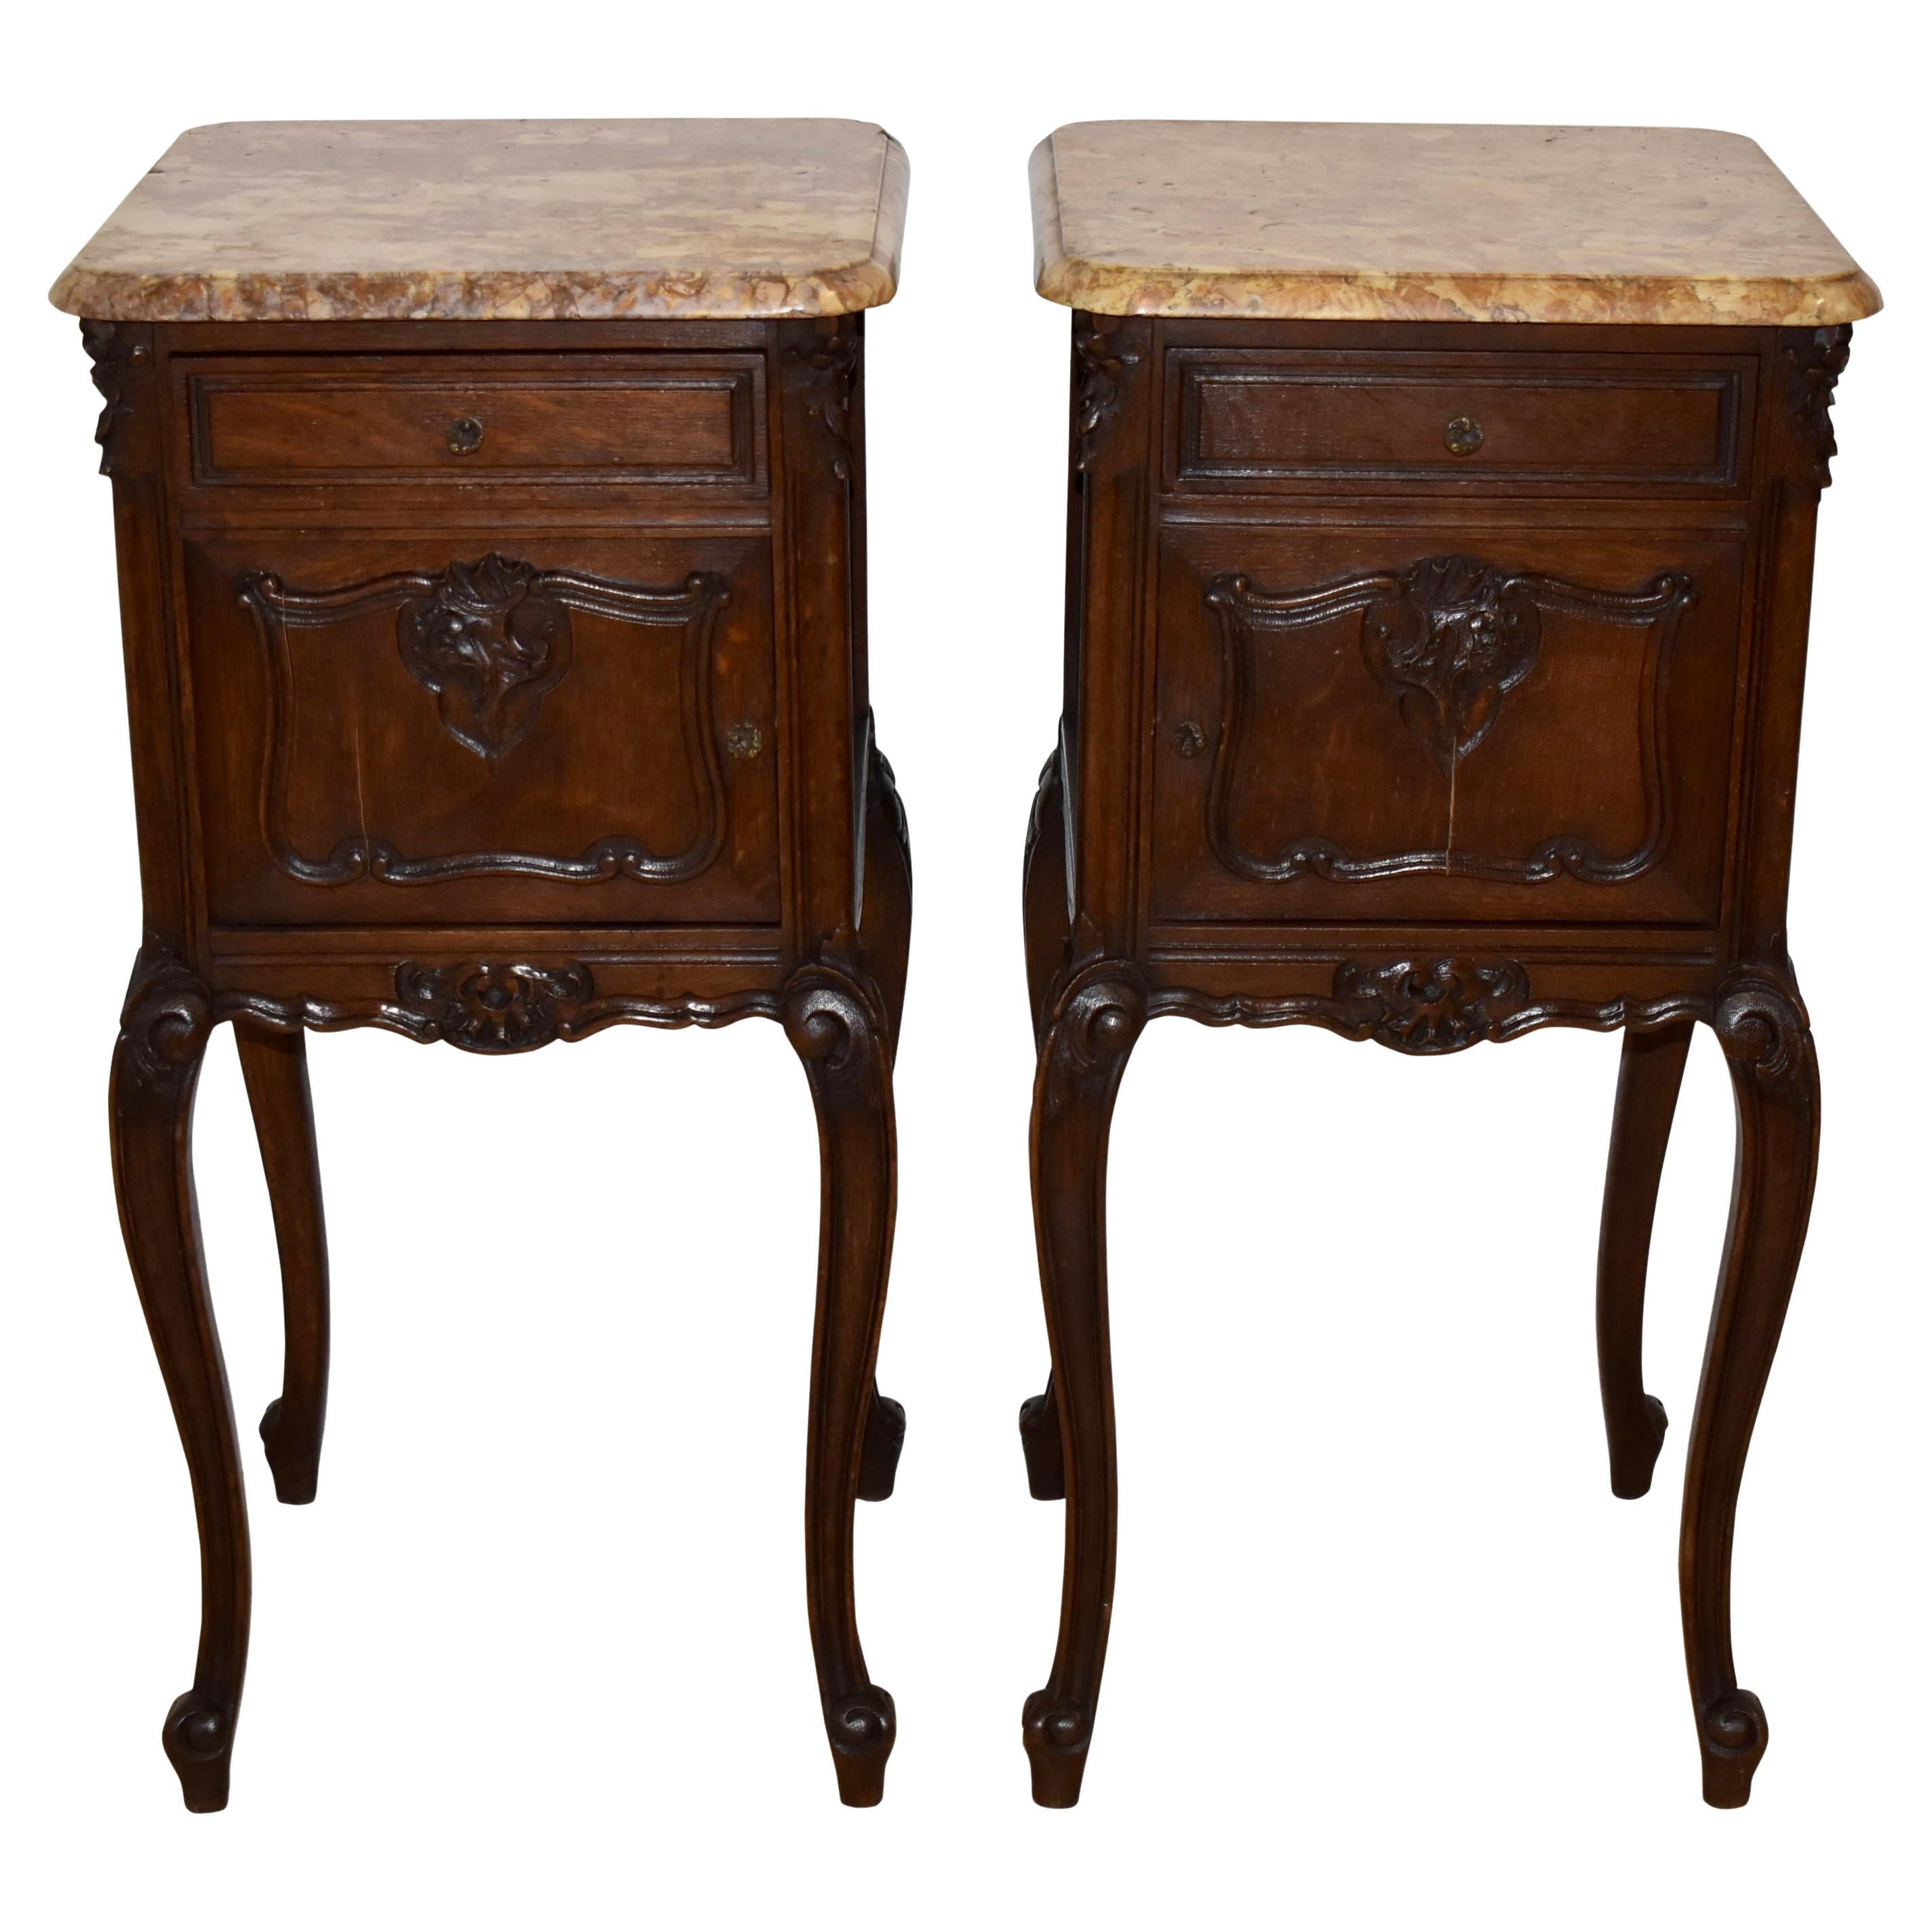 Pair of Carved Oak Nightstand Bedside Tables with Mable Tops, Circa 1900